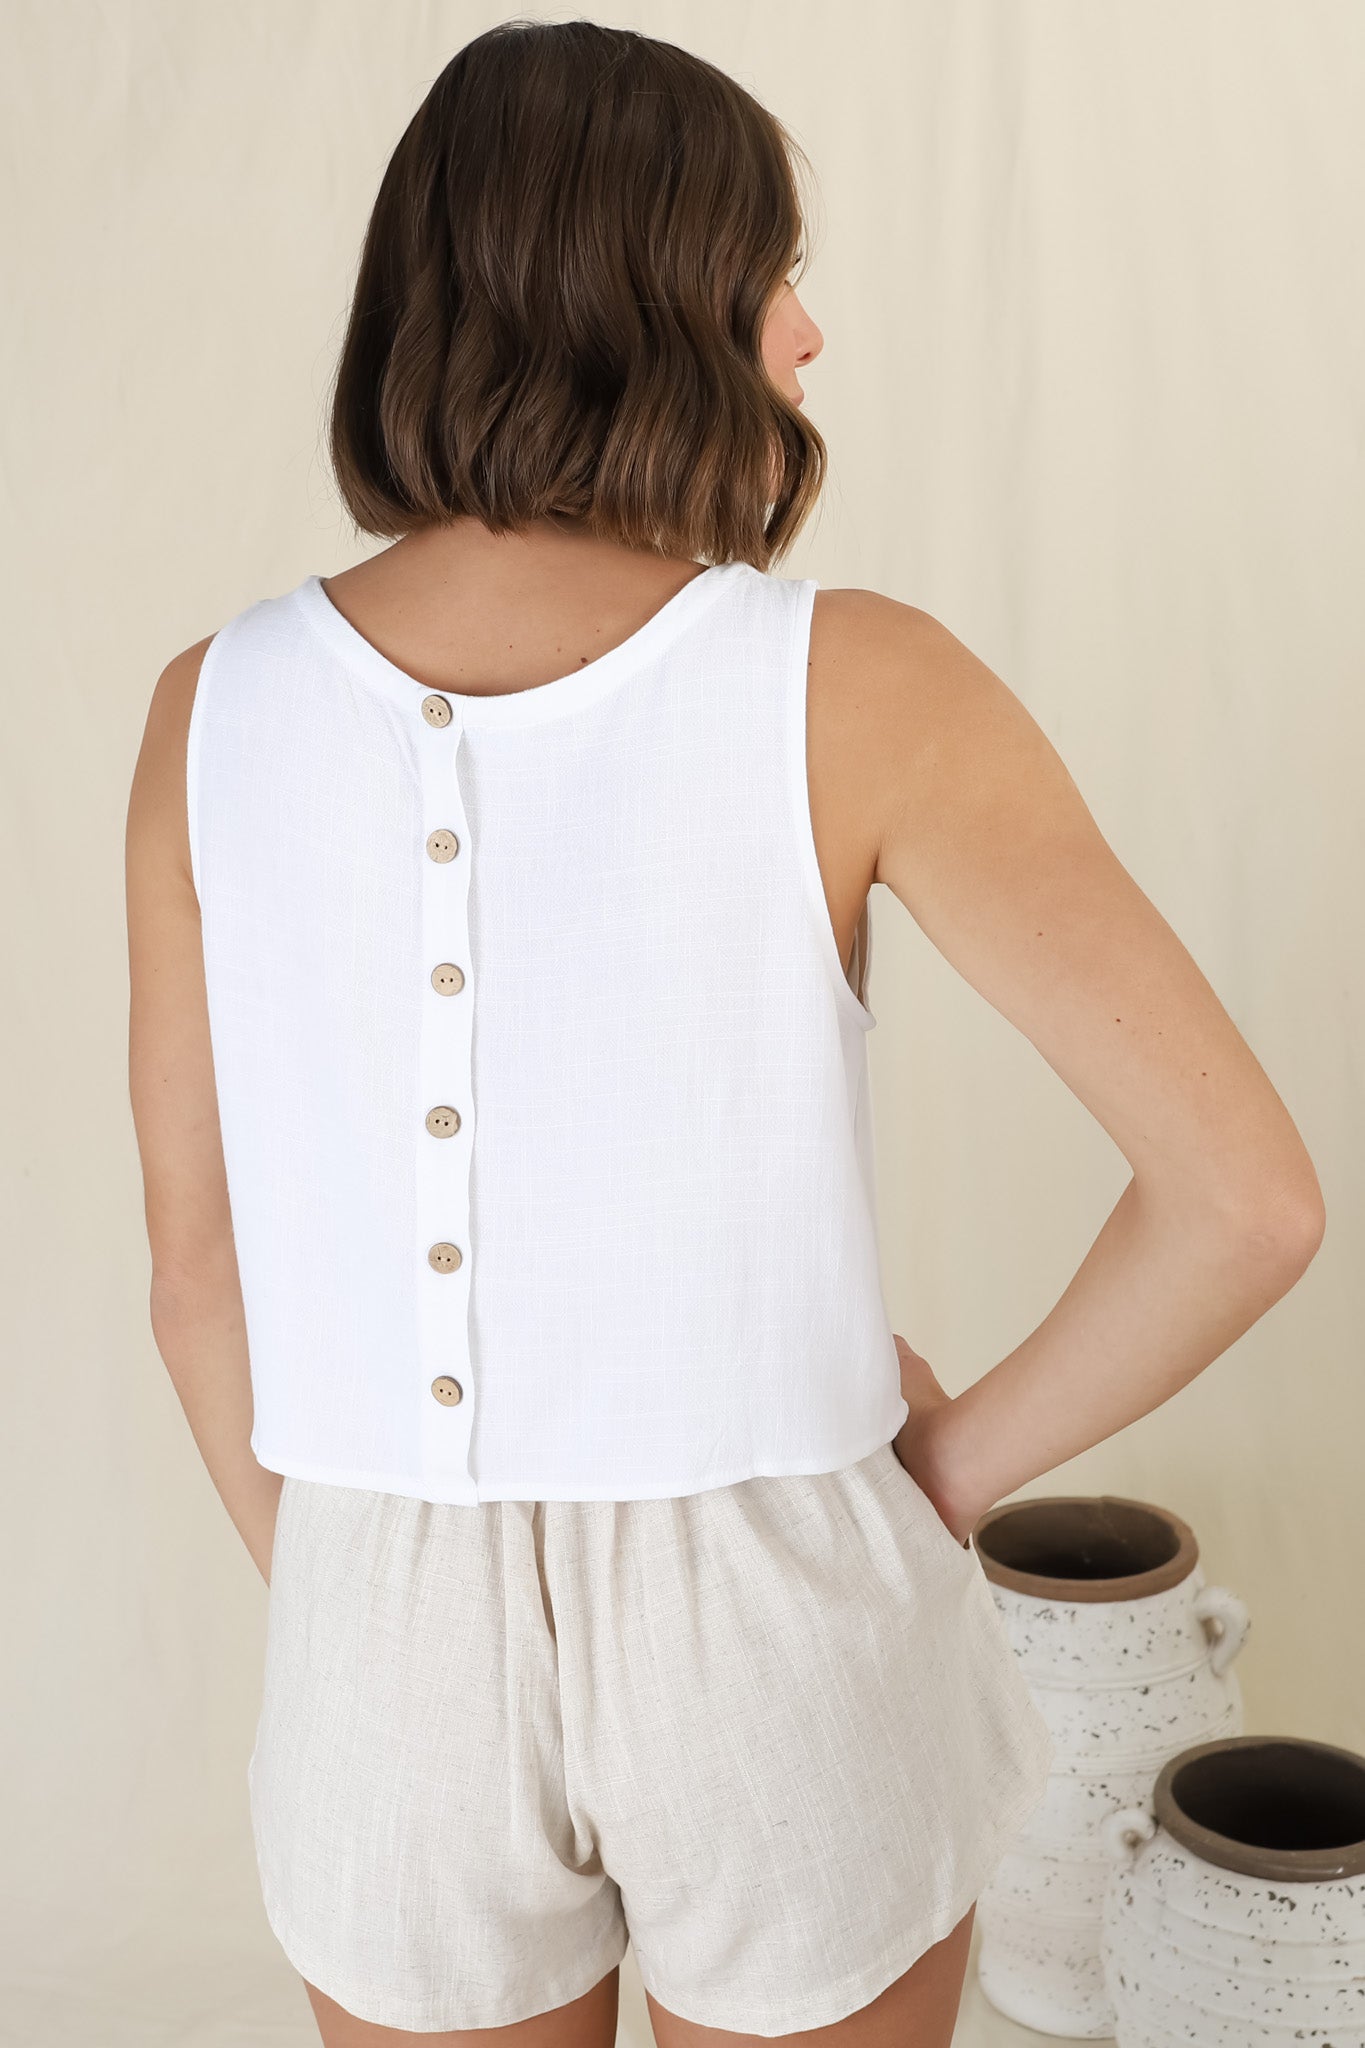 Kaydee Top - Boxy Sleeveless Top with Button Down Spine in White